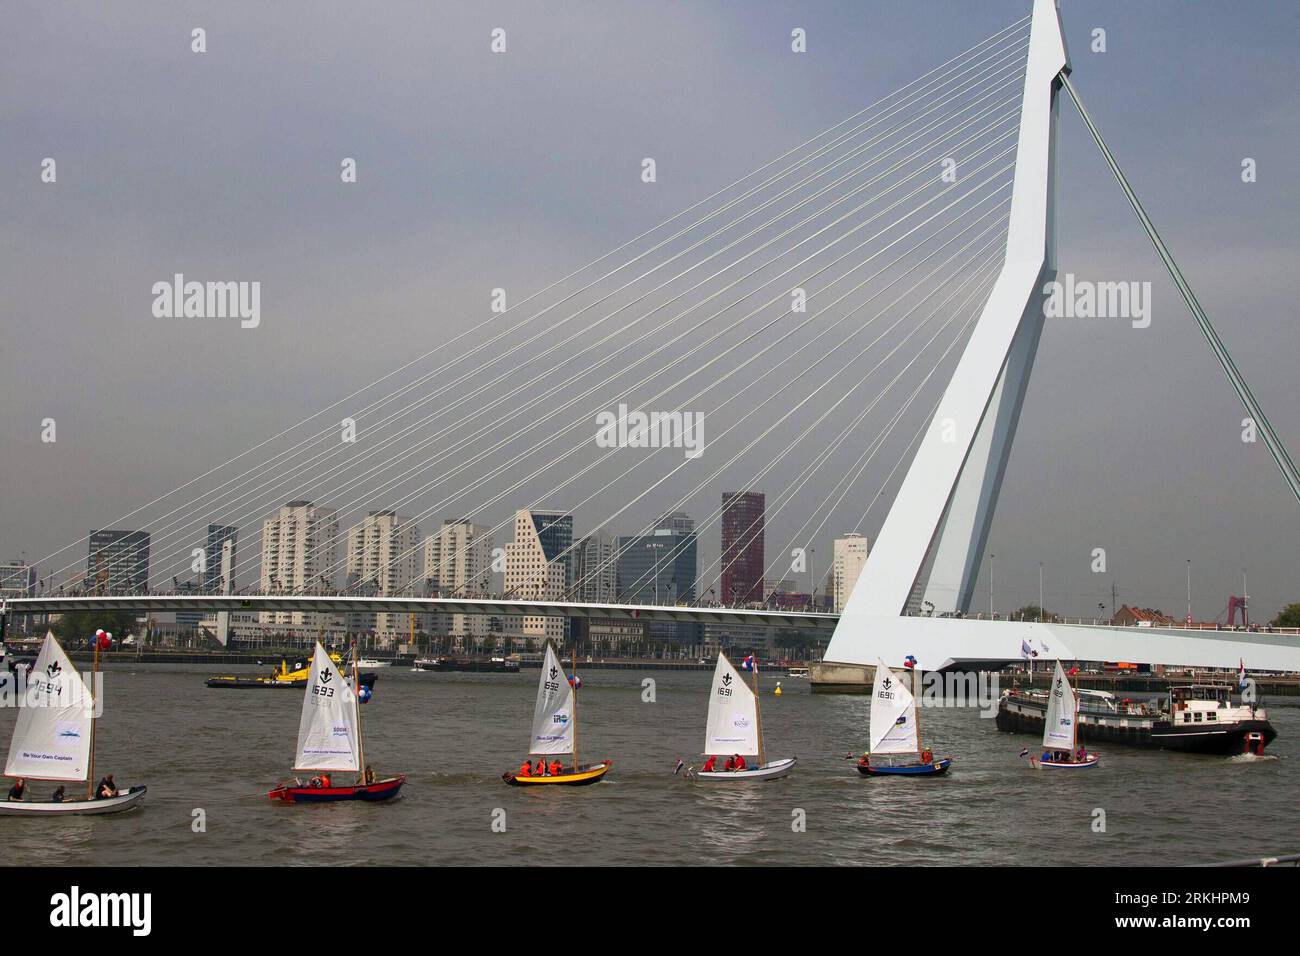 Bildnummer: 55890805  Datum: 03.09.2011  Copyright: imago/Xinhua (110903) -- ROTTERDAM, Sept. 3, 2011 (Xinhua) -- A group of boats sail on the Mass river near the port of Rotterdam, celebrating the openning of the annual festival World Harbor Day on Sept. 2, 2011. The World Harbor Day is an event that lets the public peek behind the scenes of the biggest European port, the port of Rotterdam. Around 400,000 visit the festival every year. (Xinhua/Pan Zhi) NETHERLANDS-ROTTERDAM-WORLD HARBOR DAY PUBLICATIONxNOTxINxCHN Gesellschaft Schifffahrt Schiff Boot Welt Hafen Tage Hafentage premiumd xbs x0x Stock Photo